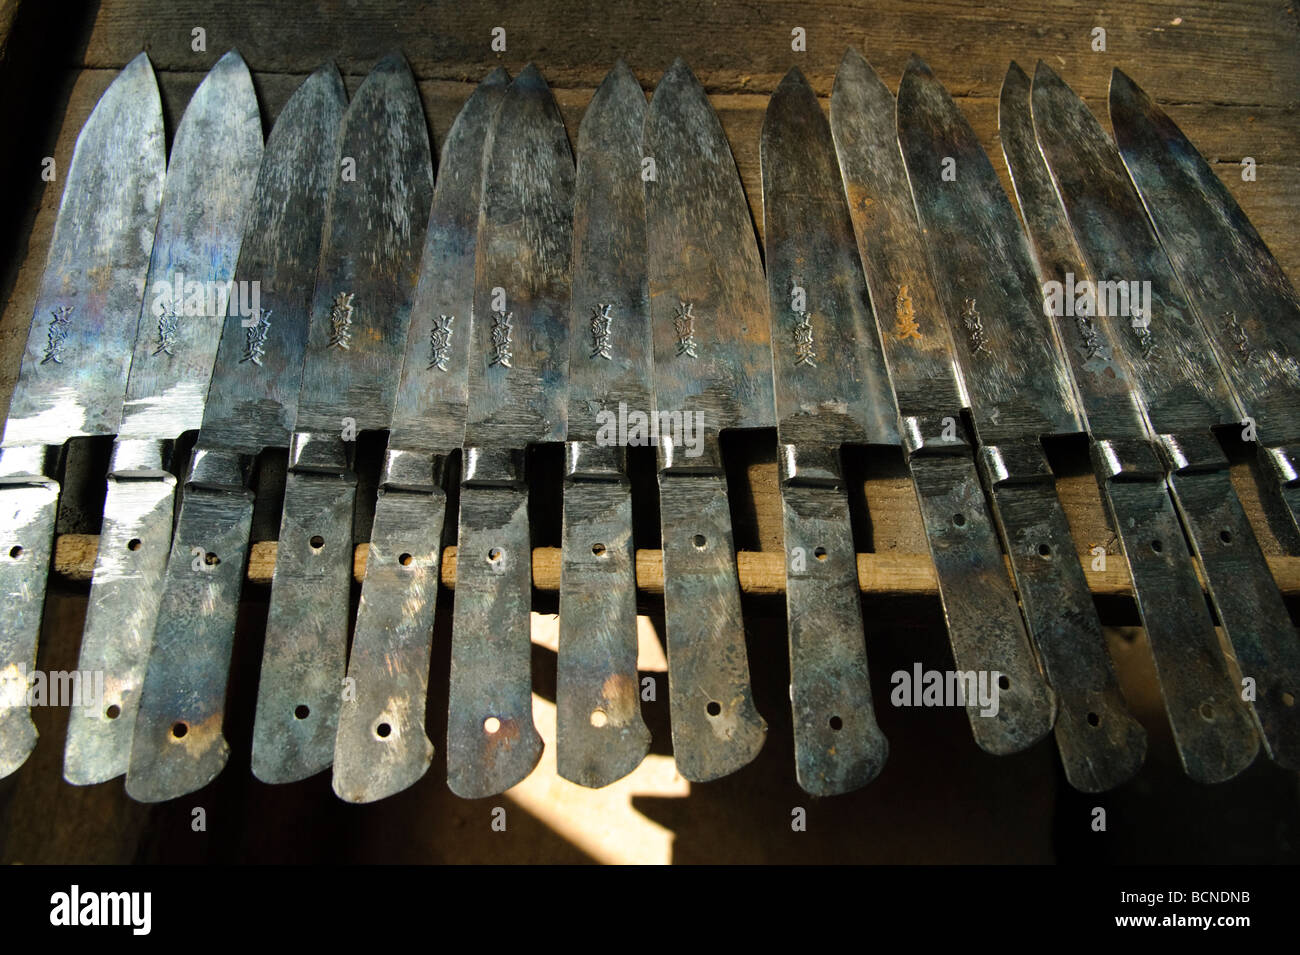 Traditional Japanese knives, Takahashi knife factory, Tokyo Japan, August 7 2008. Stock Photo